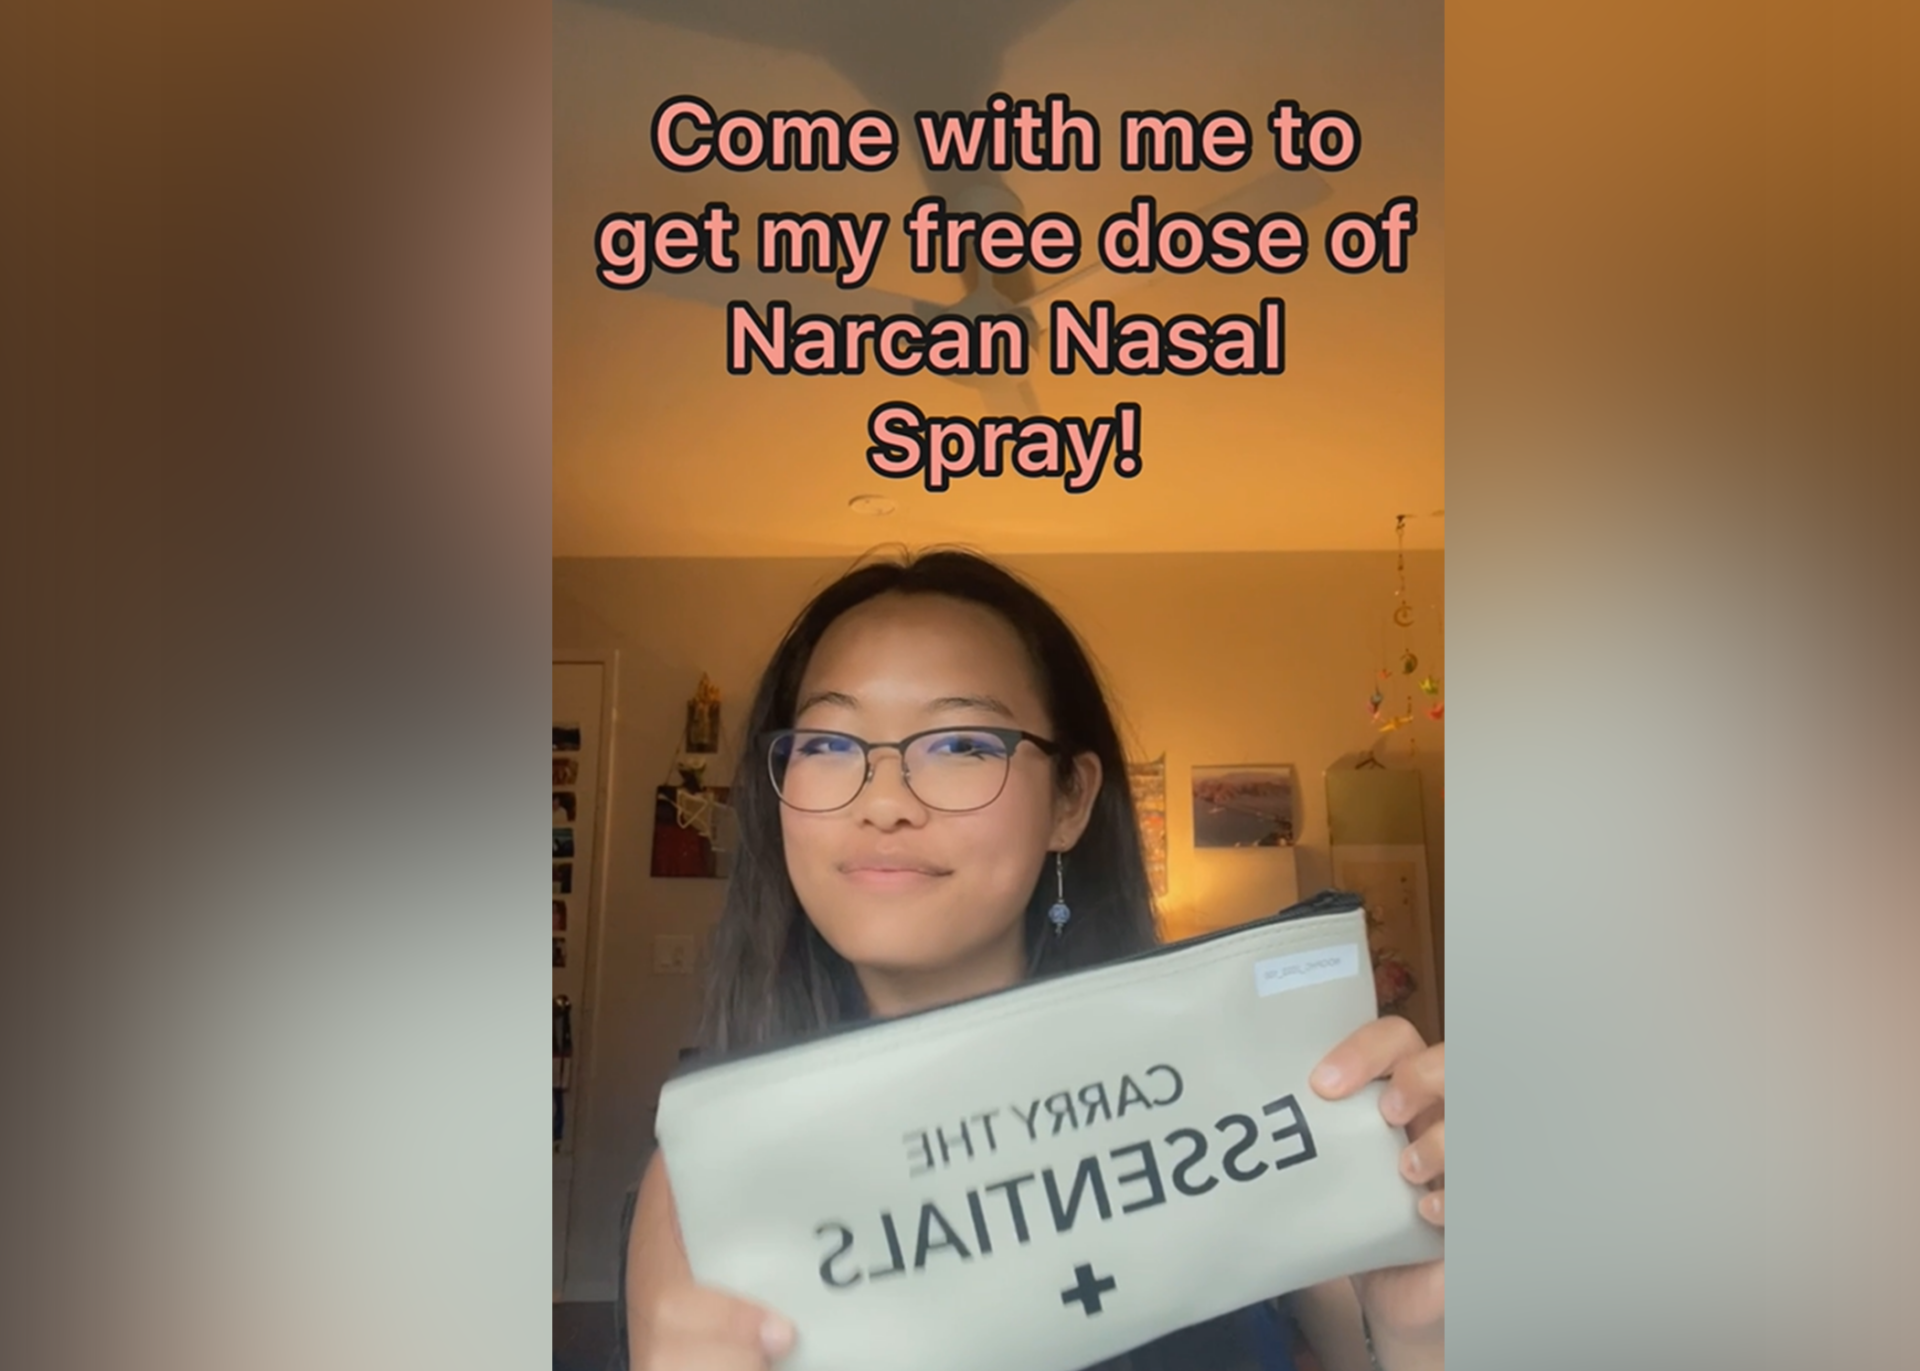 Screen shot of TikTok "Come with me to get my free dose of Narcan Nasal Spray"